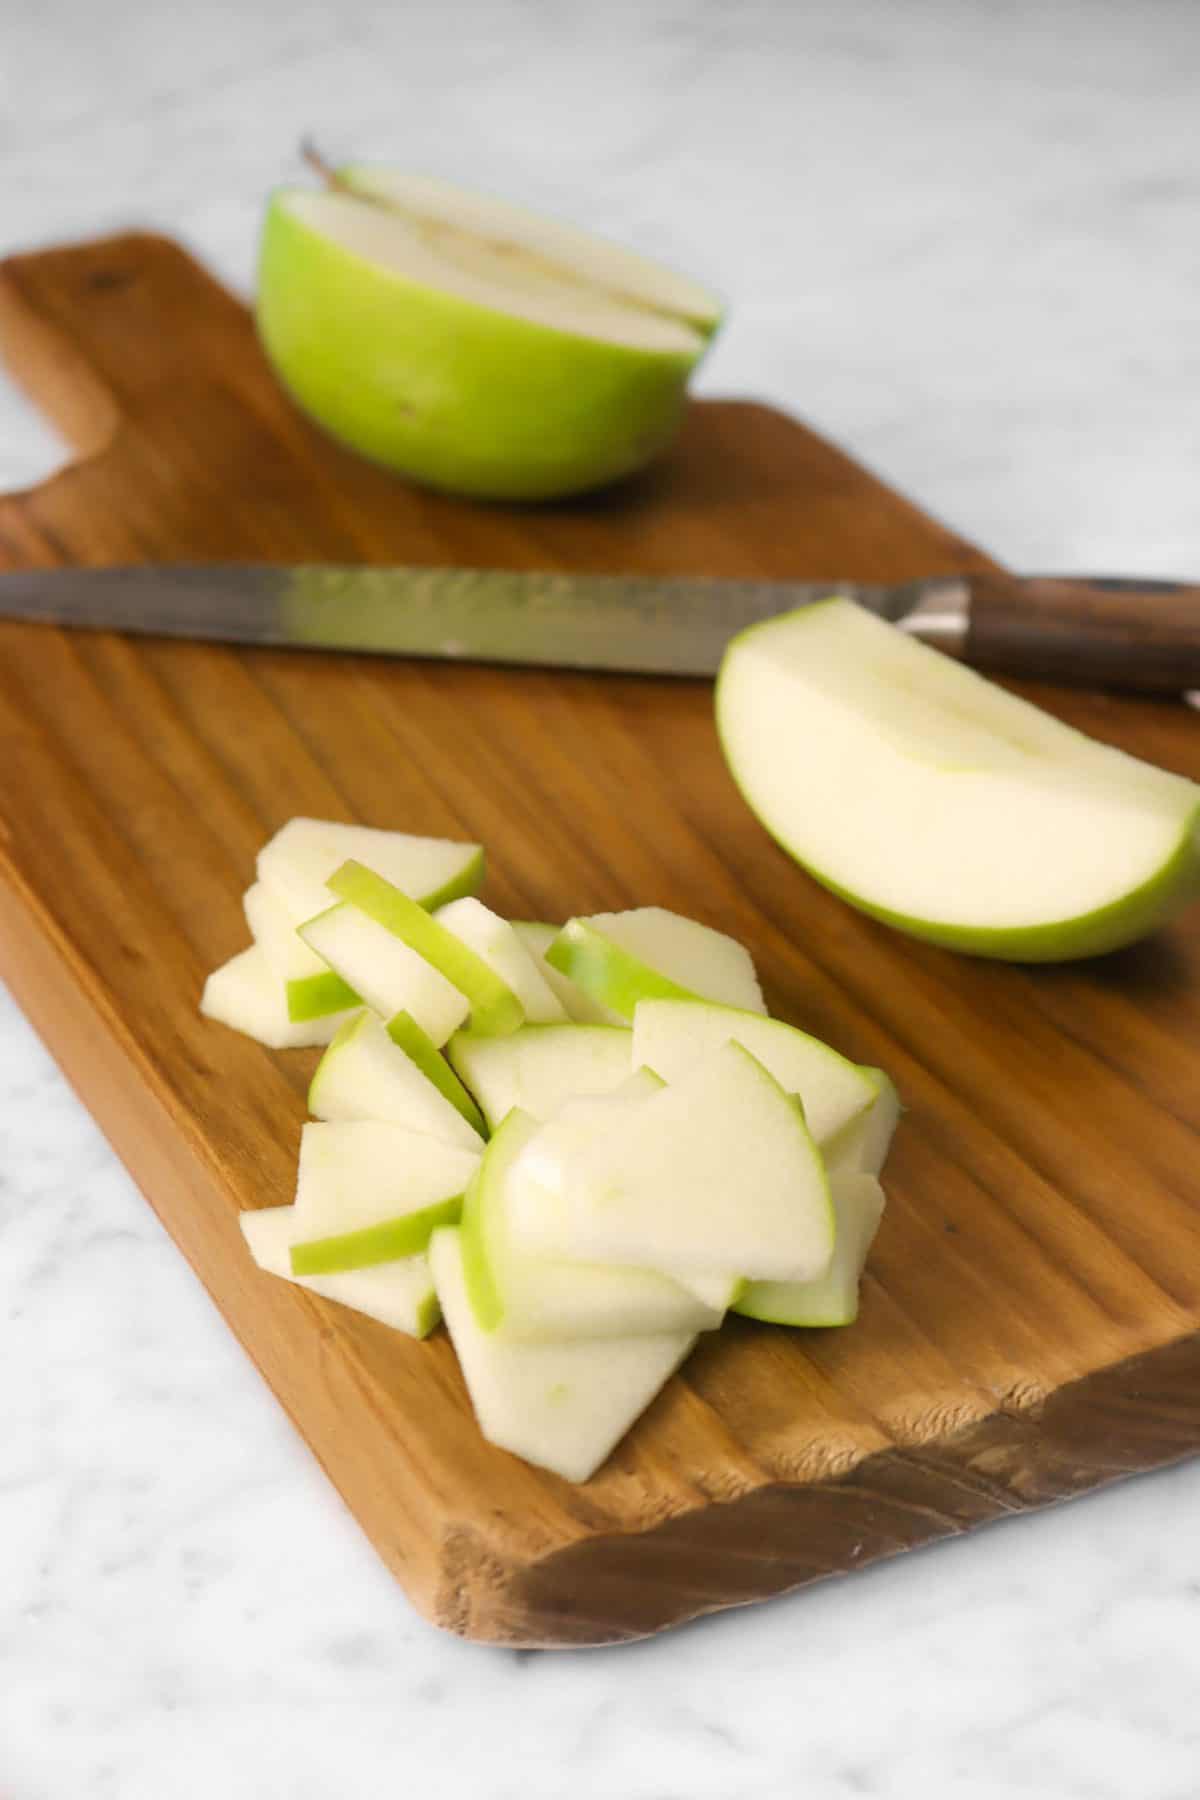 green apple on a wood cutting board with a knife